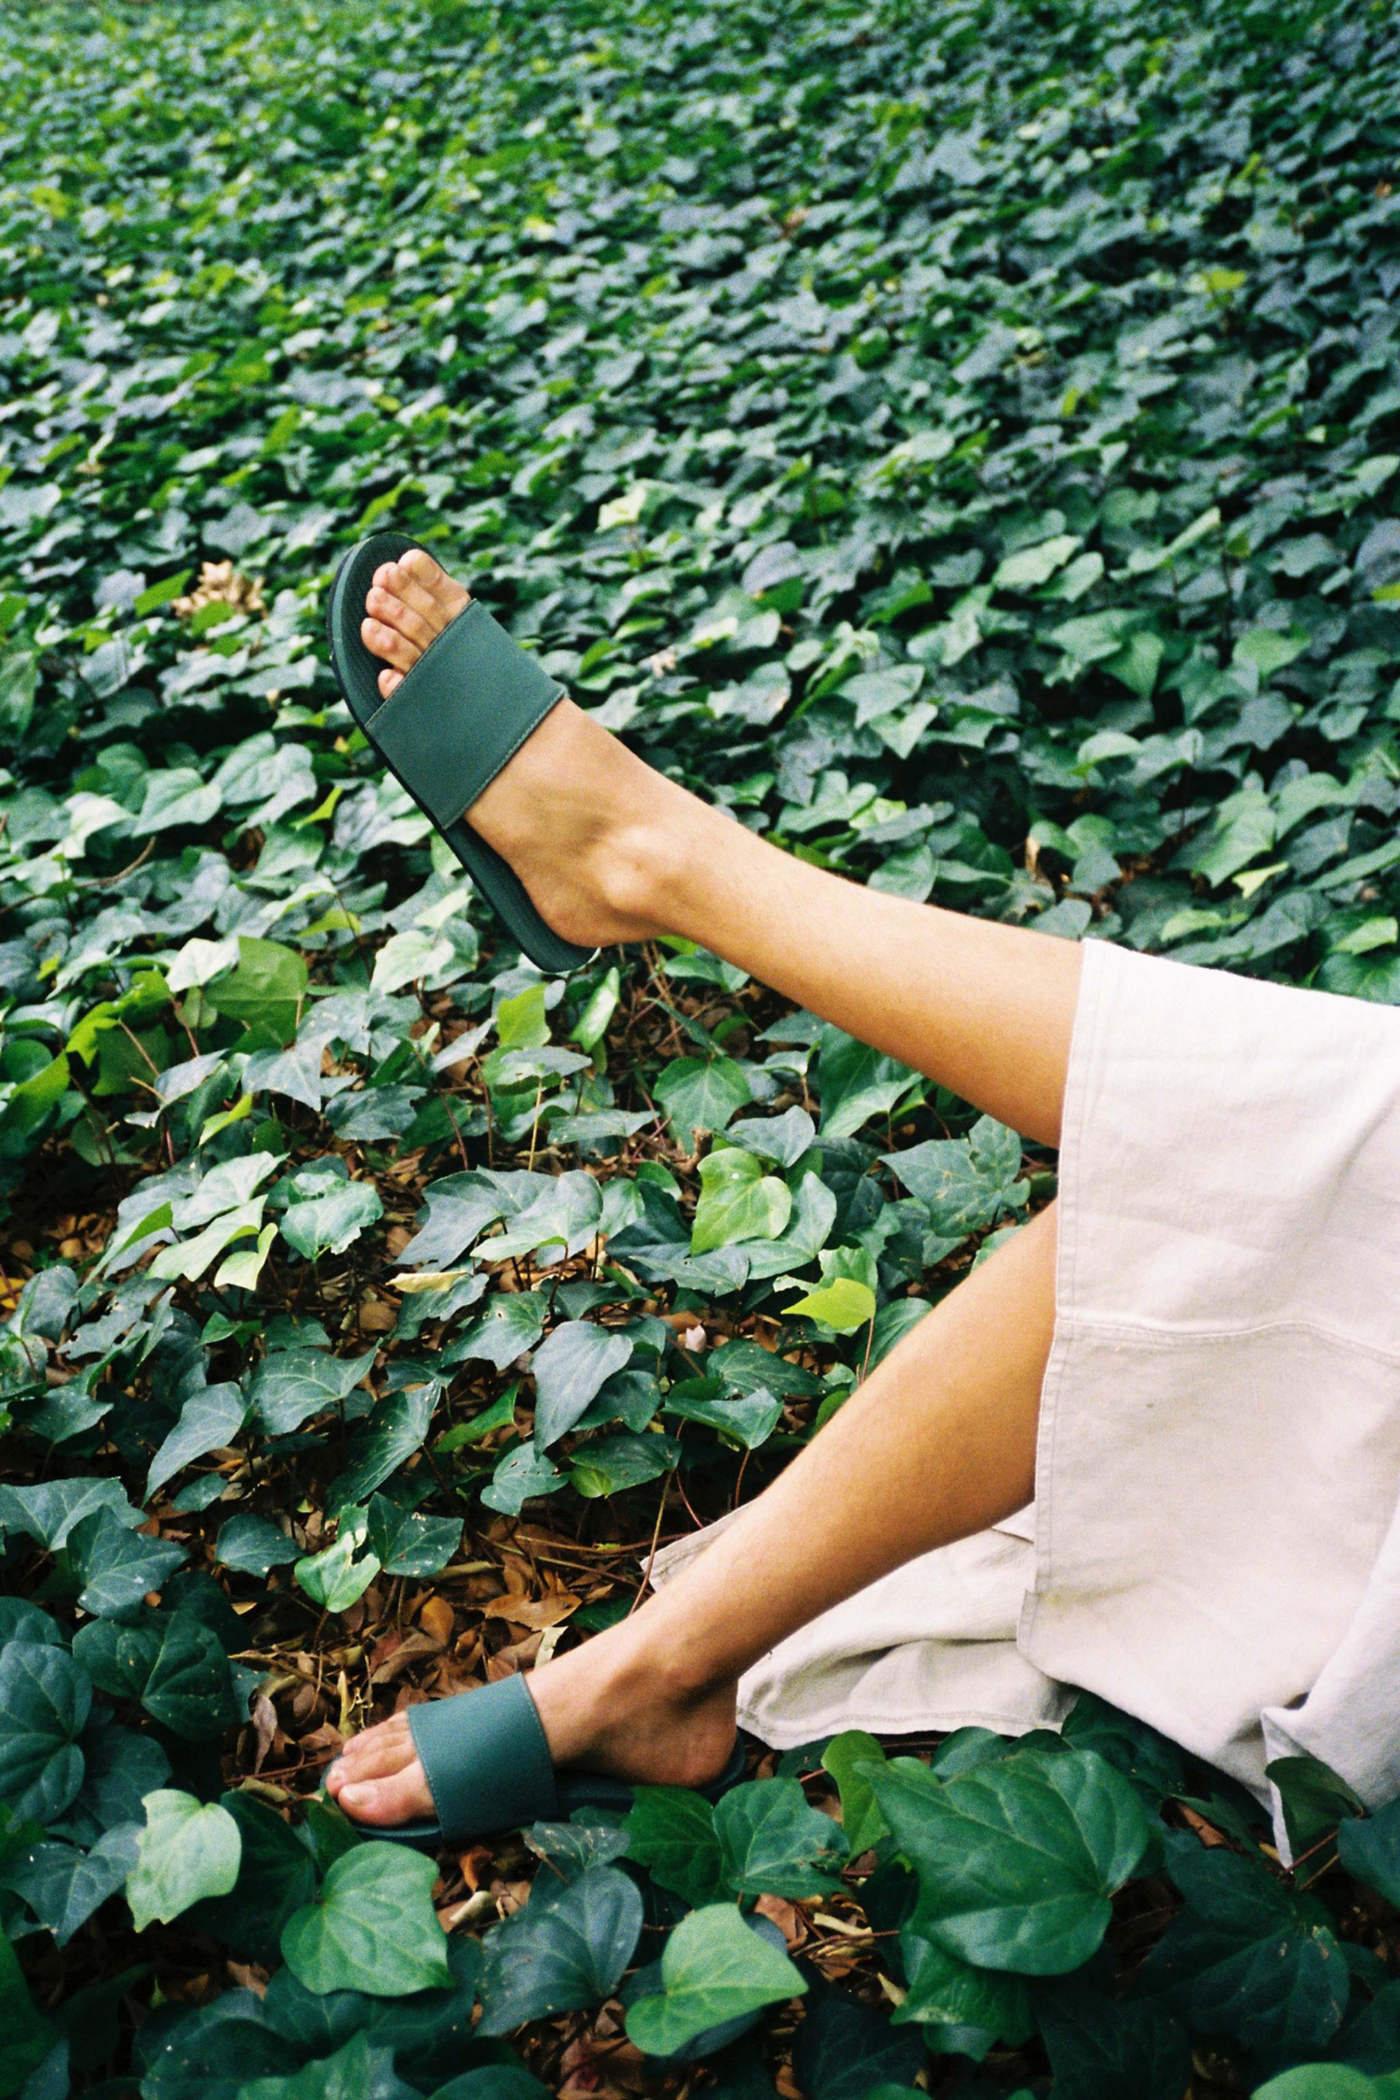 Indosole Women’s ESSNTLS Slides in Leaf, available on ZERRIN with free Singapore shipping